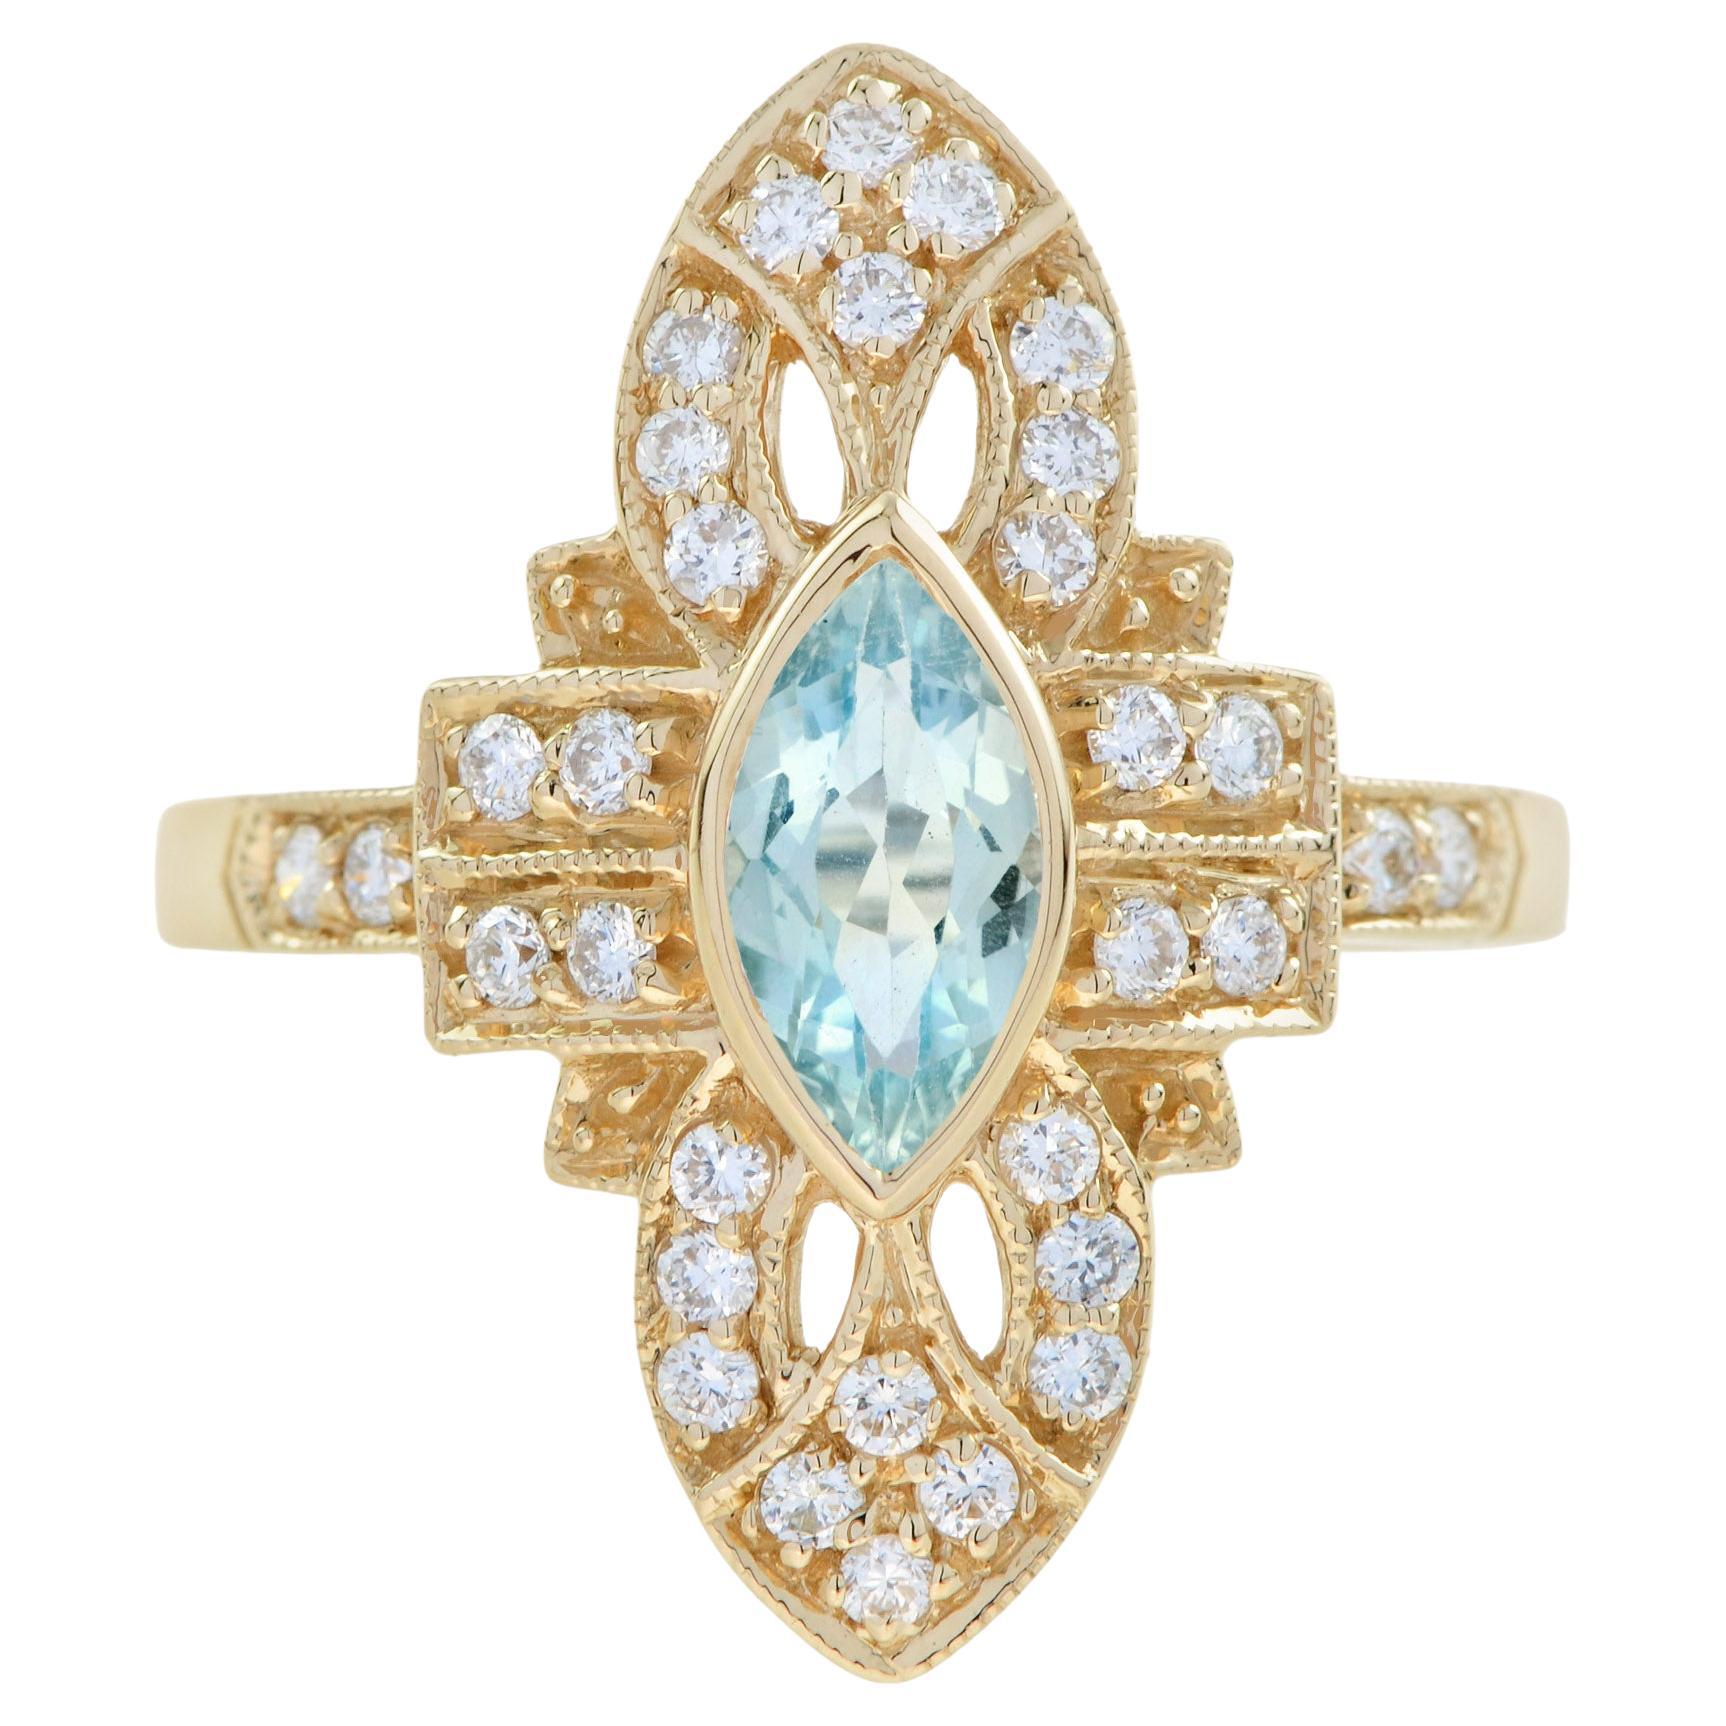 For Sale:  Aquamarine and Diamond Art Deco Style Marquise Shape Ring in 18K Yellow Gold